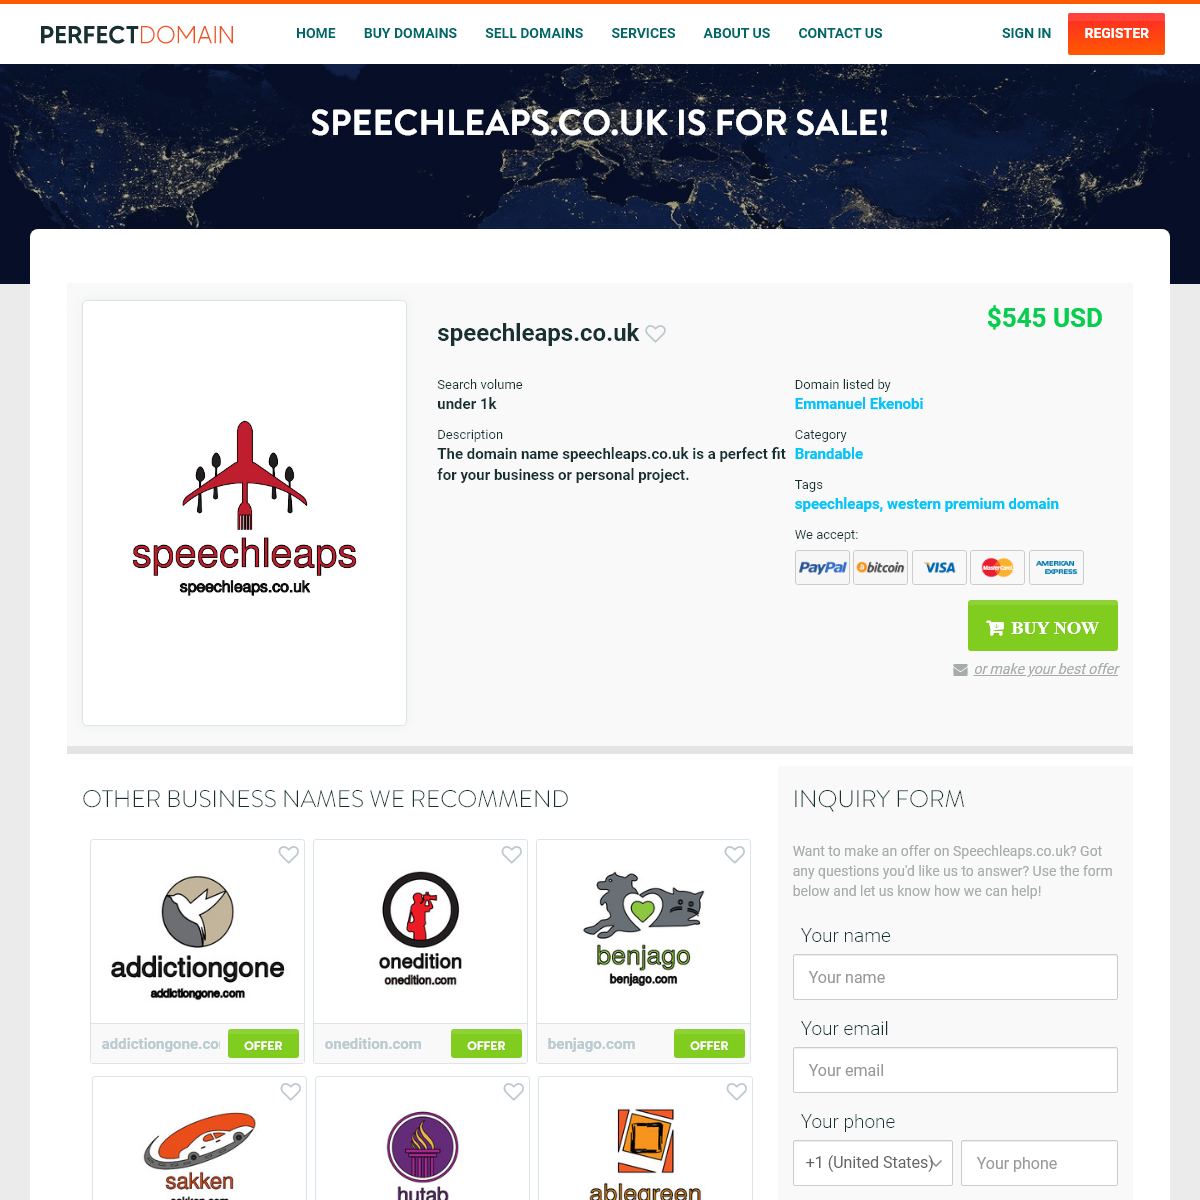 A complete backup of speechleaps.co.uk